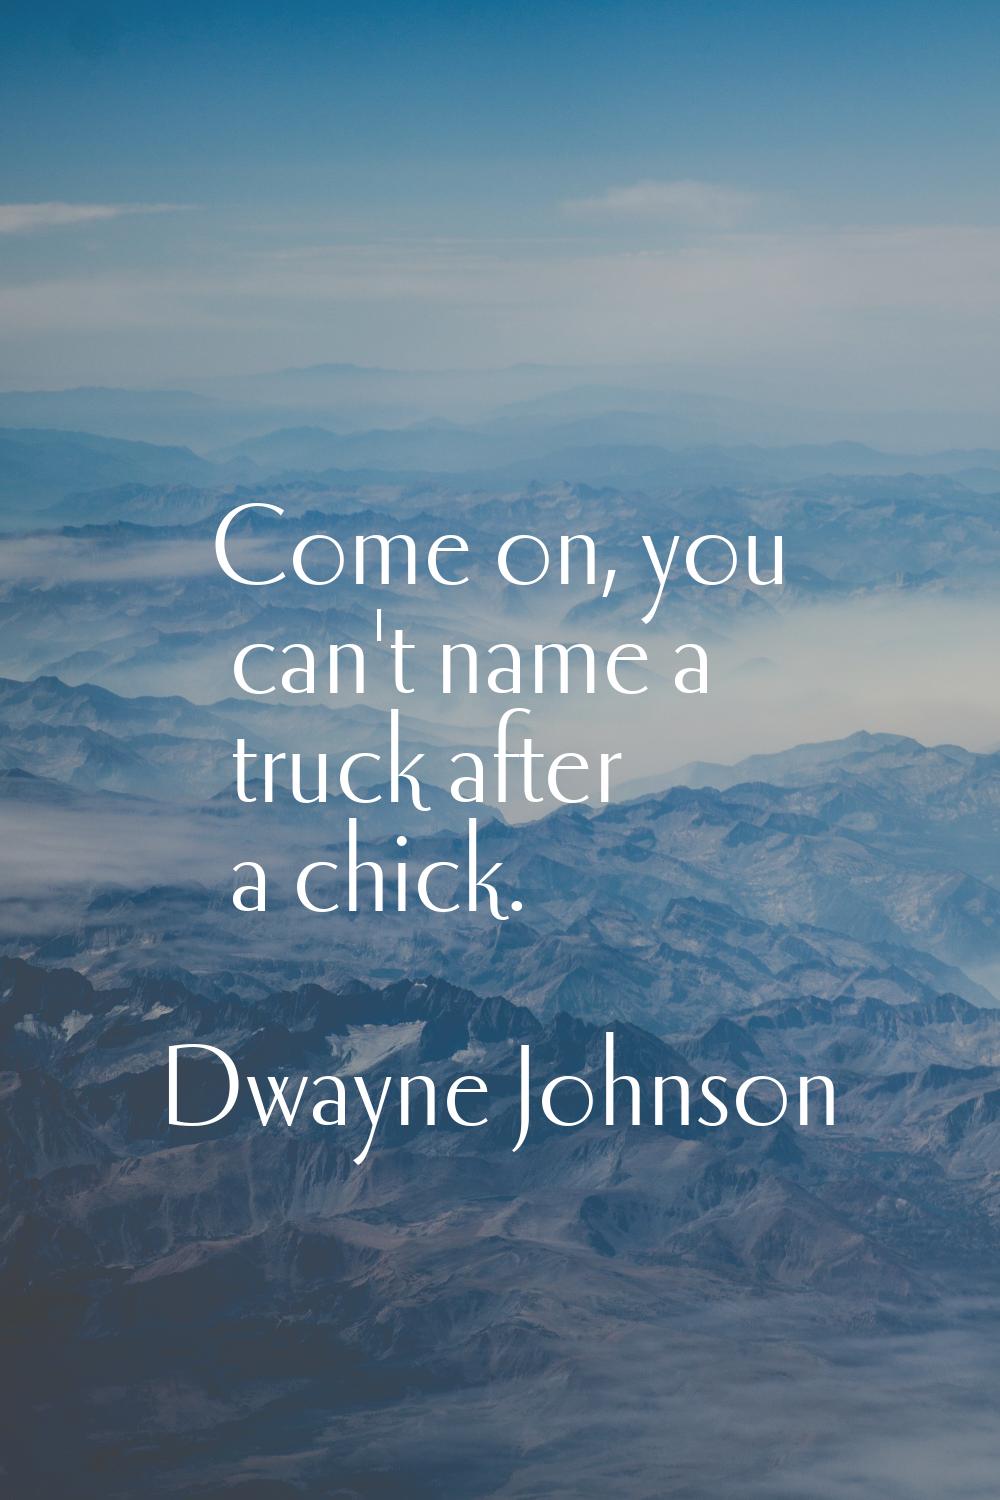 Come on, you can't name a truck after a chick.